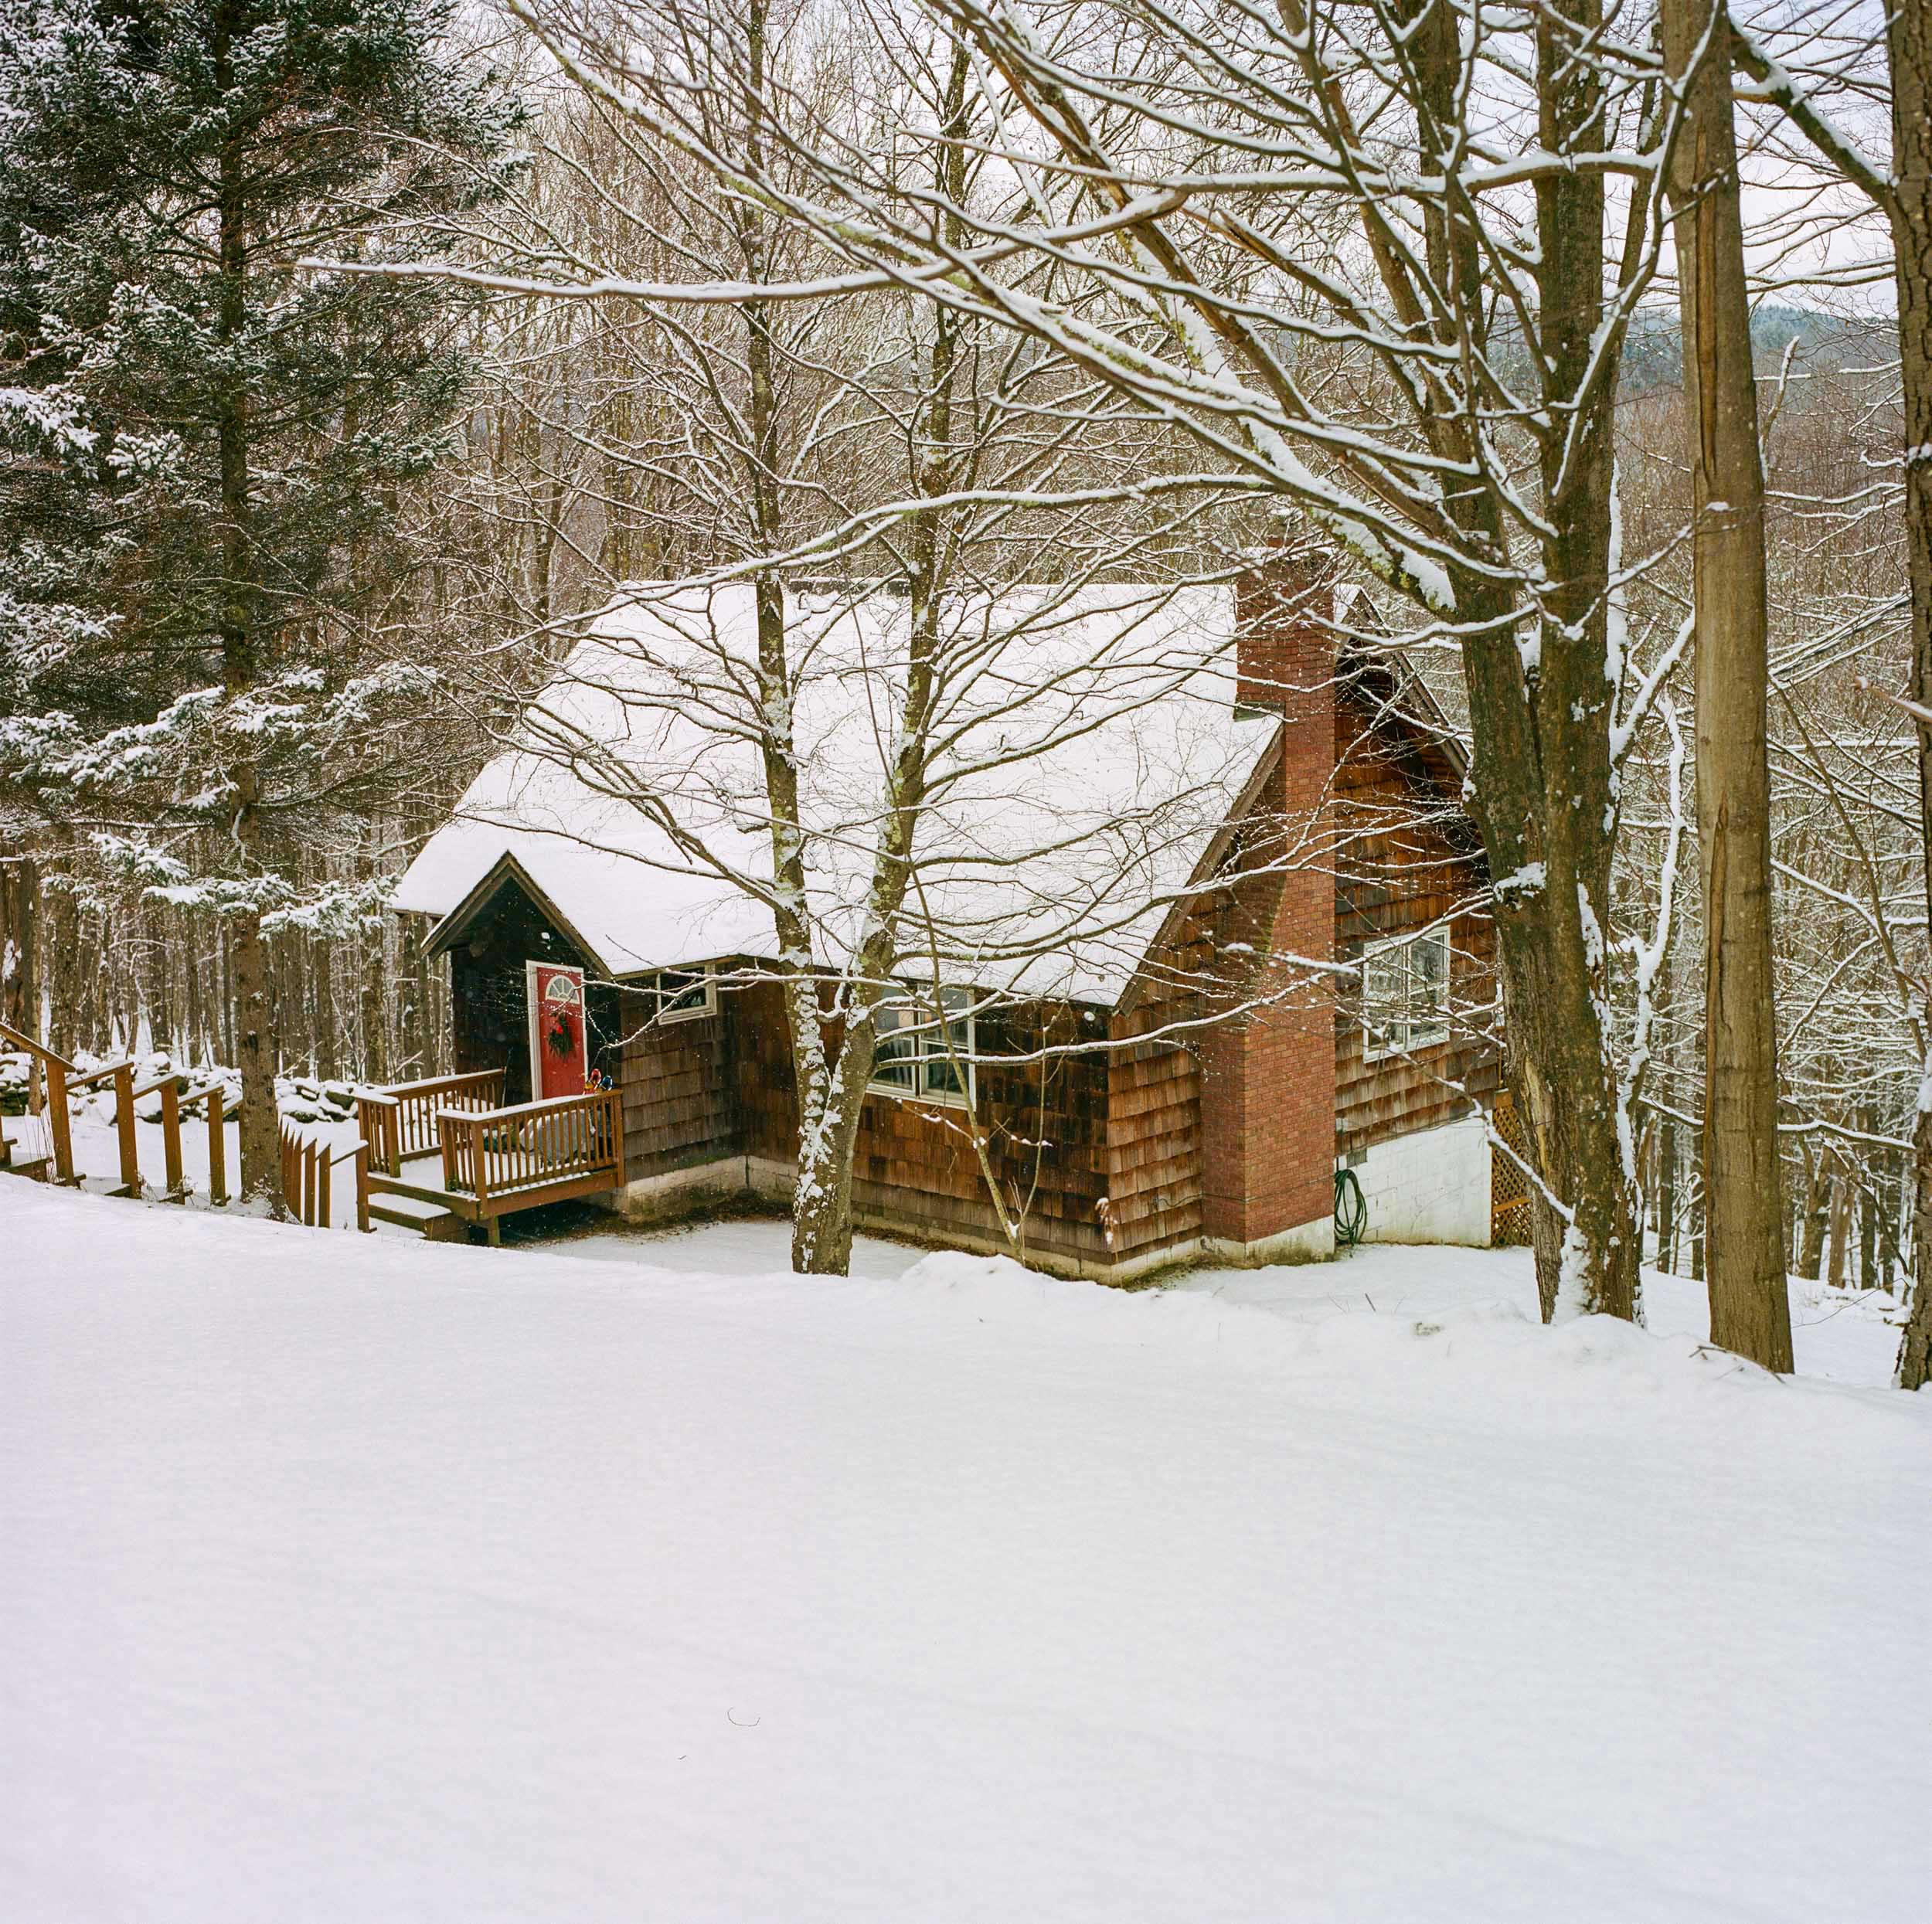 A-COSY-HOUSE-SURROUNDED-BY-SNOW-IN-UPSTATE-NEW-YORK